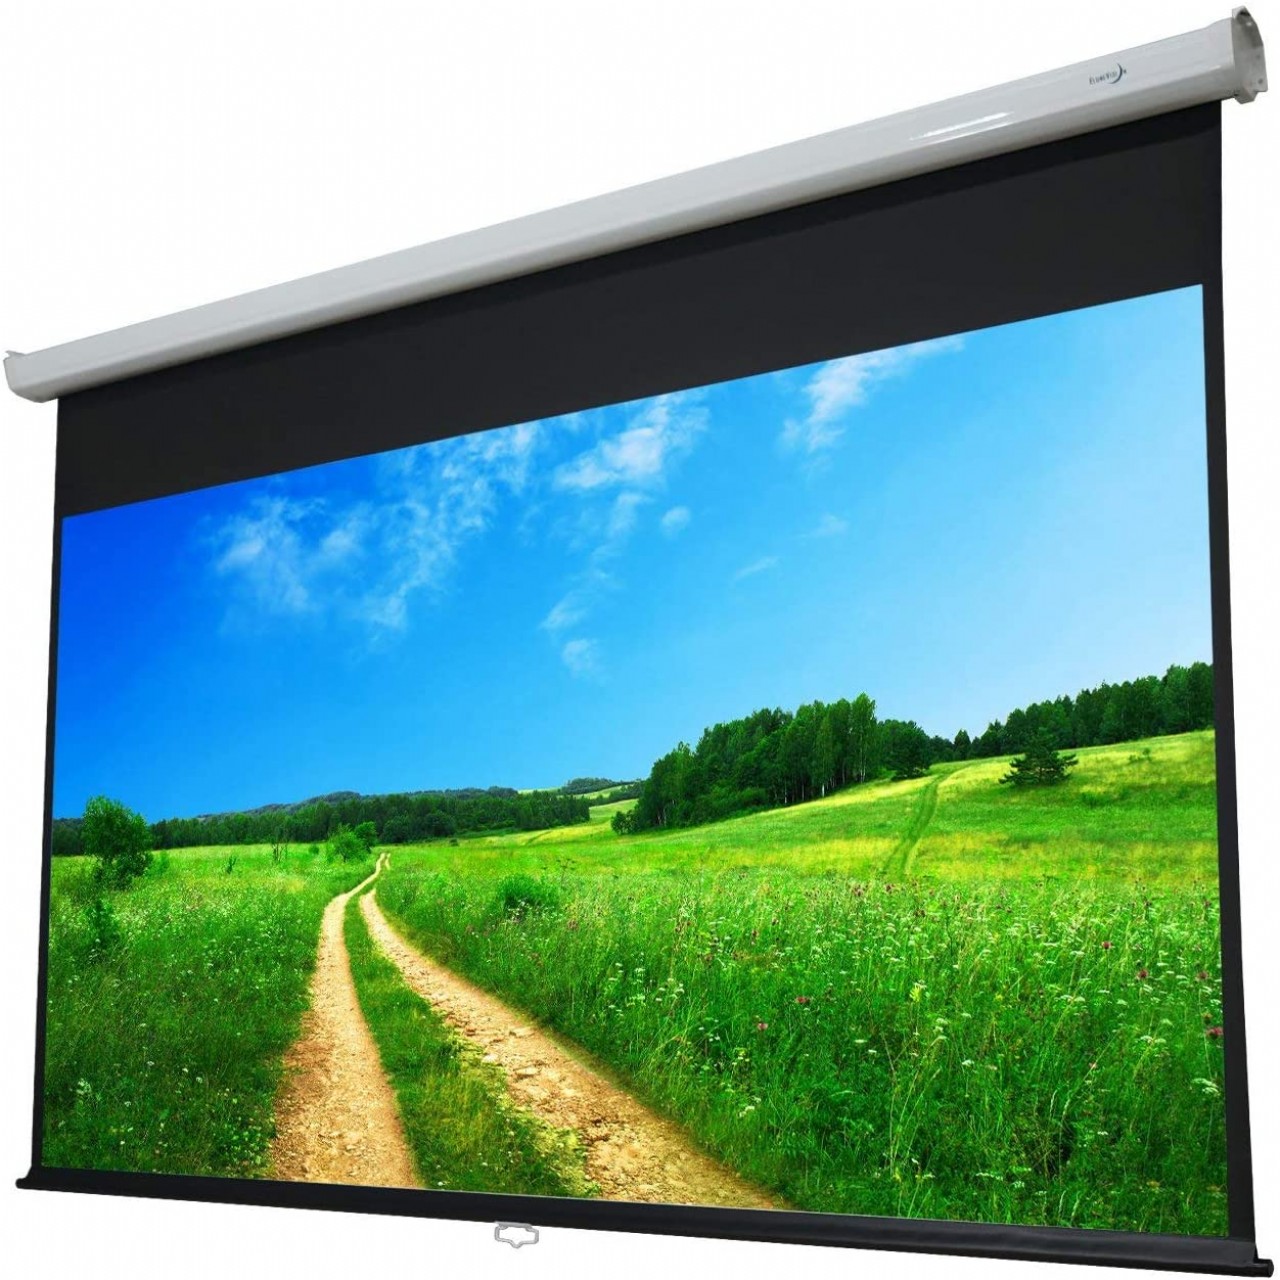 EluneVision EV-M2-106-1.2 Projection Screen